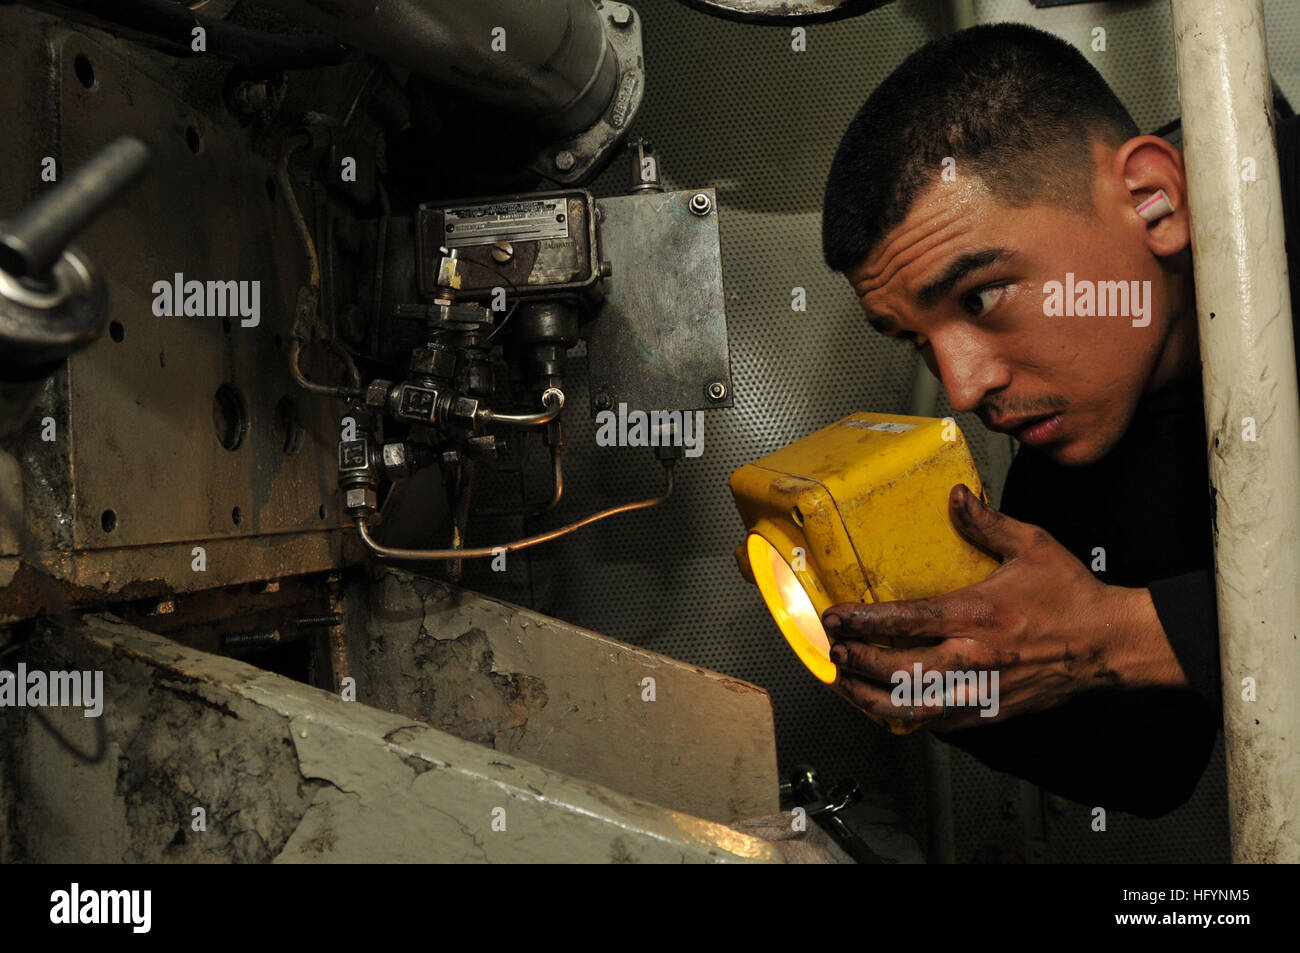 110406-N-NL541-091 CARIBBEAN SEA (April 6, 2011) Engineman 2nd Class Justin Davila, assigned to the guided-missile frigate USS Boone (FFG 28), uses a flashlight to inspect a service diesel generator. Boone is deployed in support of Southern Seas 2011. (U.S. Navy photo by Mass Communication Specialist 3rd Class Stuart Phillips/Released) US Navy 110406-N-NL541-091 ngineman 2nd Class Justin Davila, assigned to the guided-missile frigate USS Boone (FFG 28), uses a flashlight to inspec Stock Photo